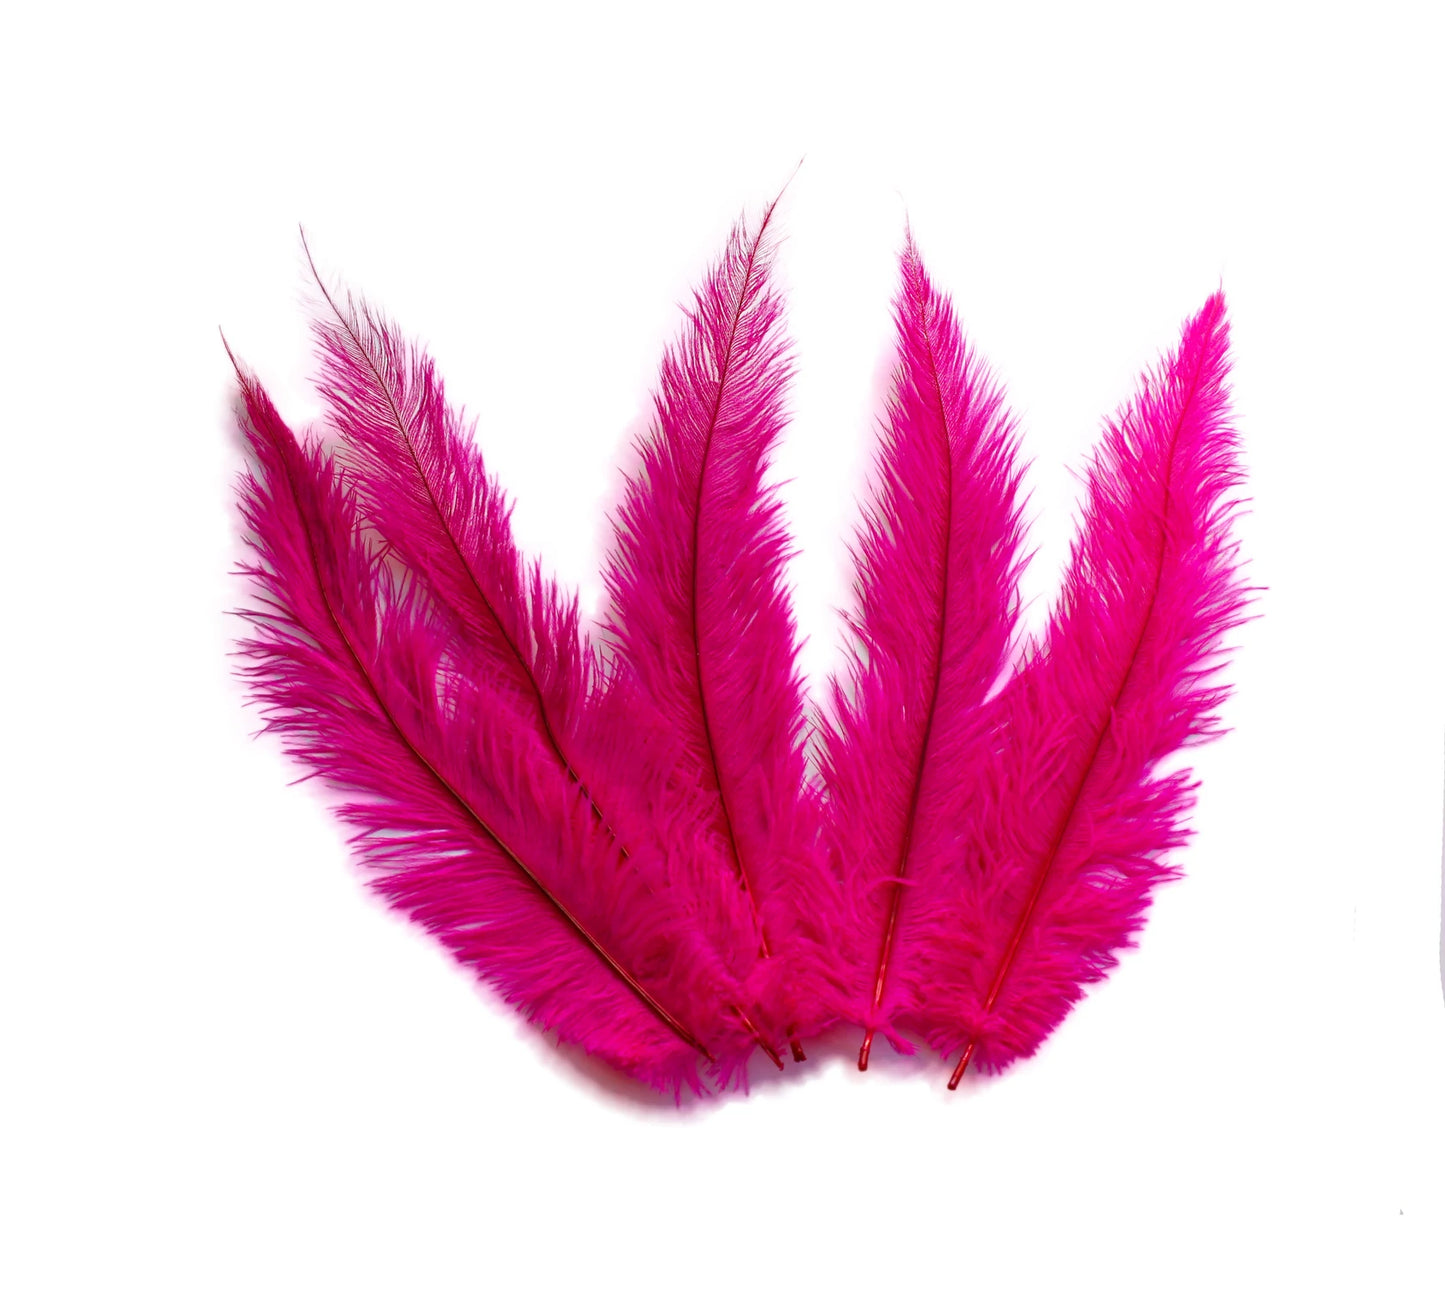 Ostrich Feather Spad Plumes 15-18" (Fuchsia) - Buy Ostrich Feathers